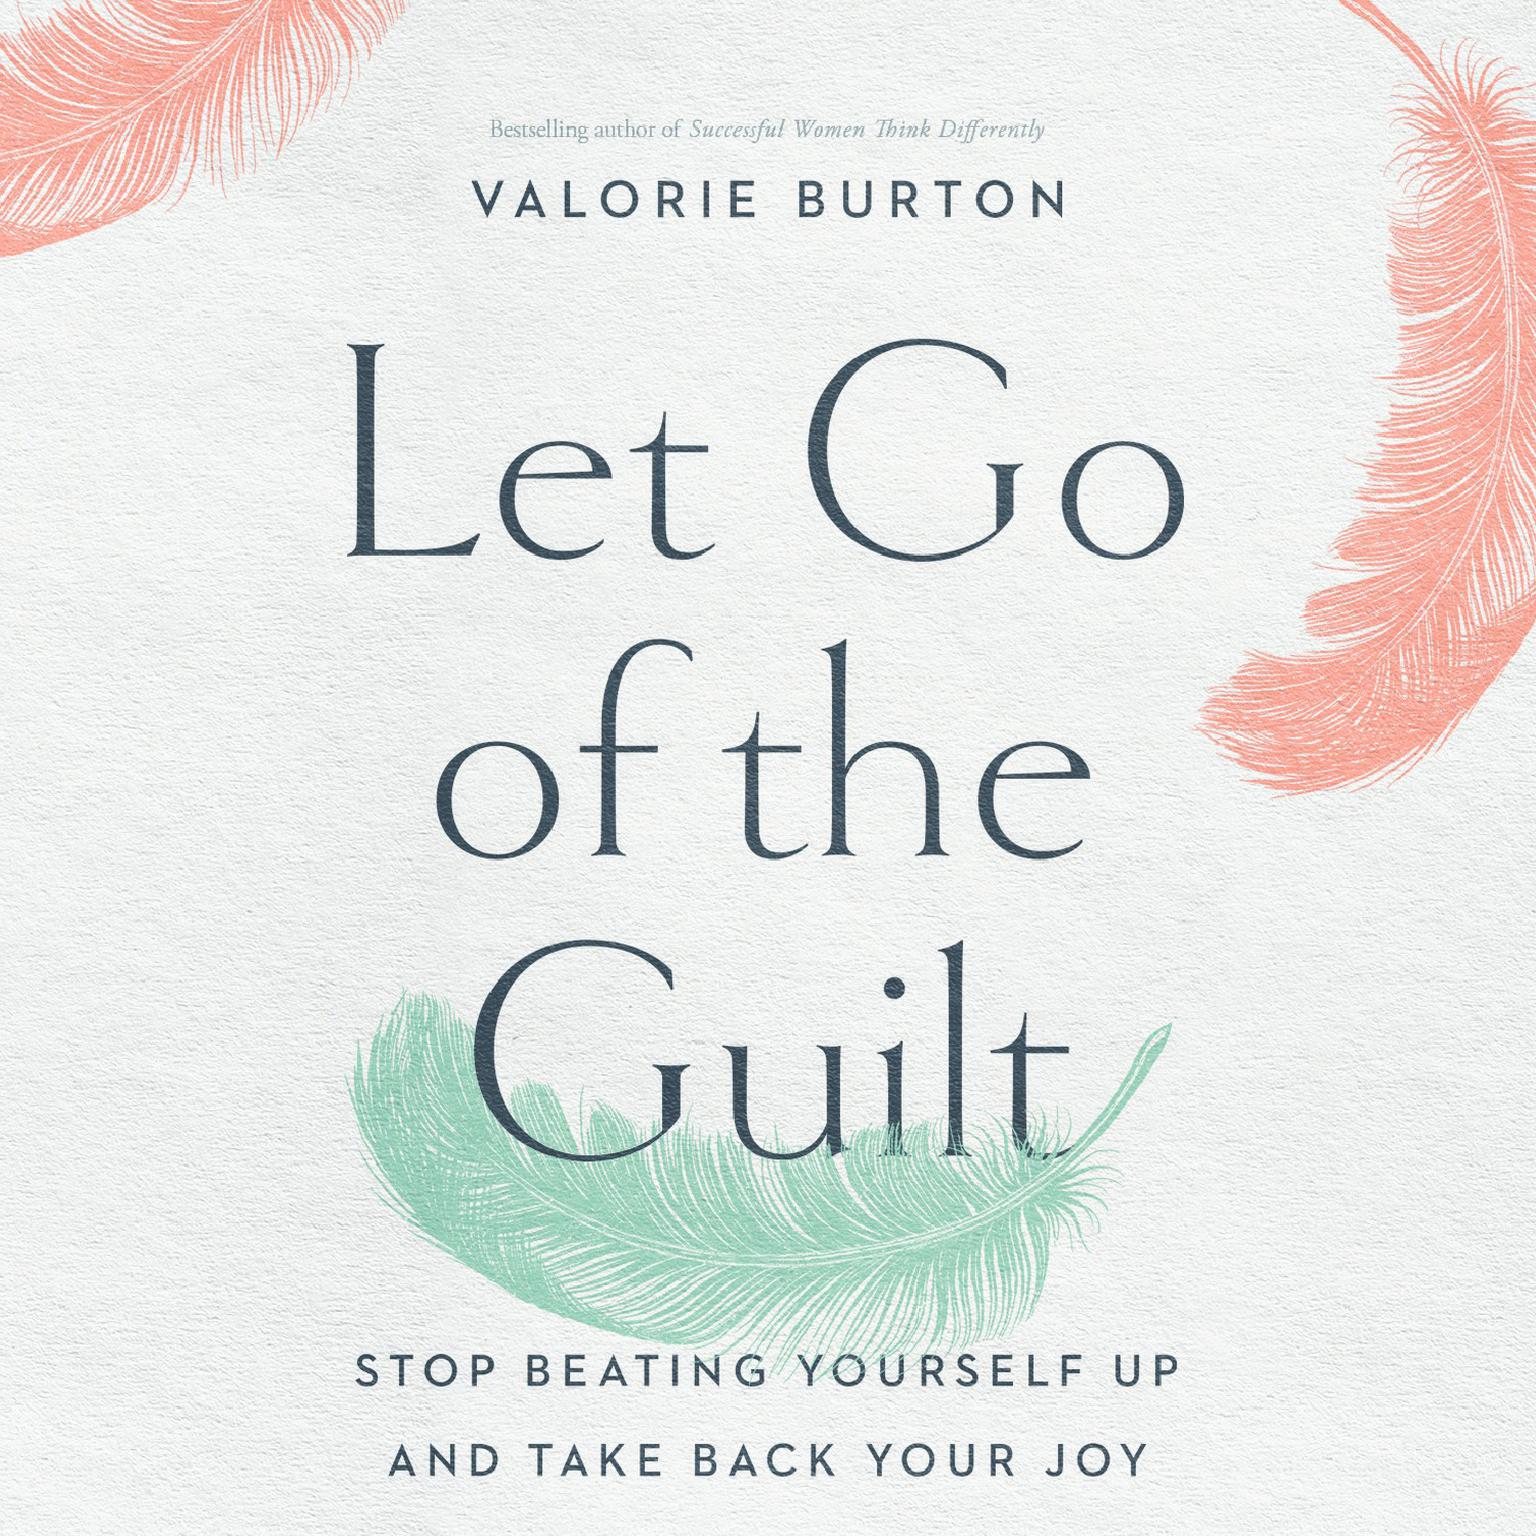 Let Go of the Guilt: Stop Beating Yourself Up and Take Back Your Joy Audiobook, by Valorie Burton